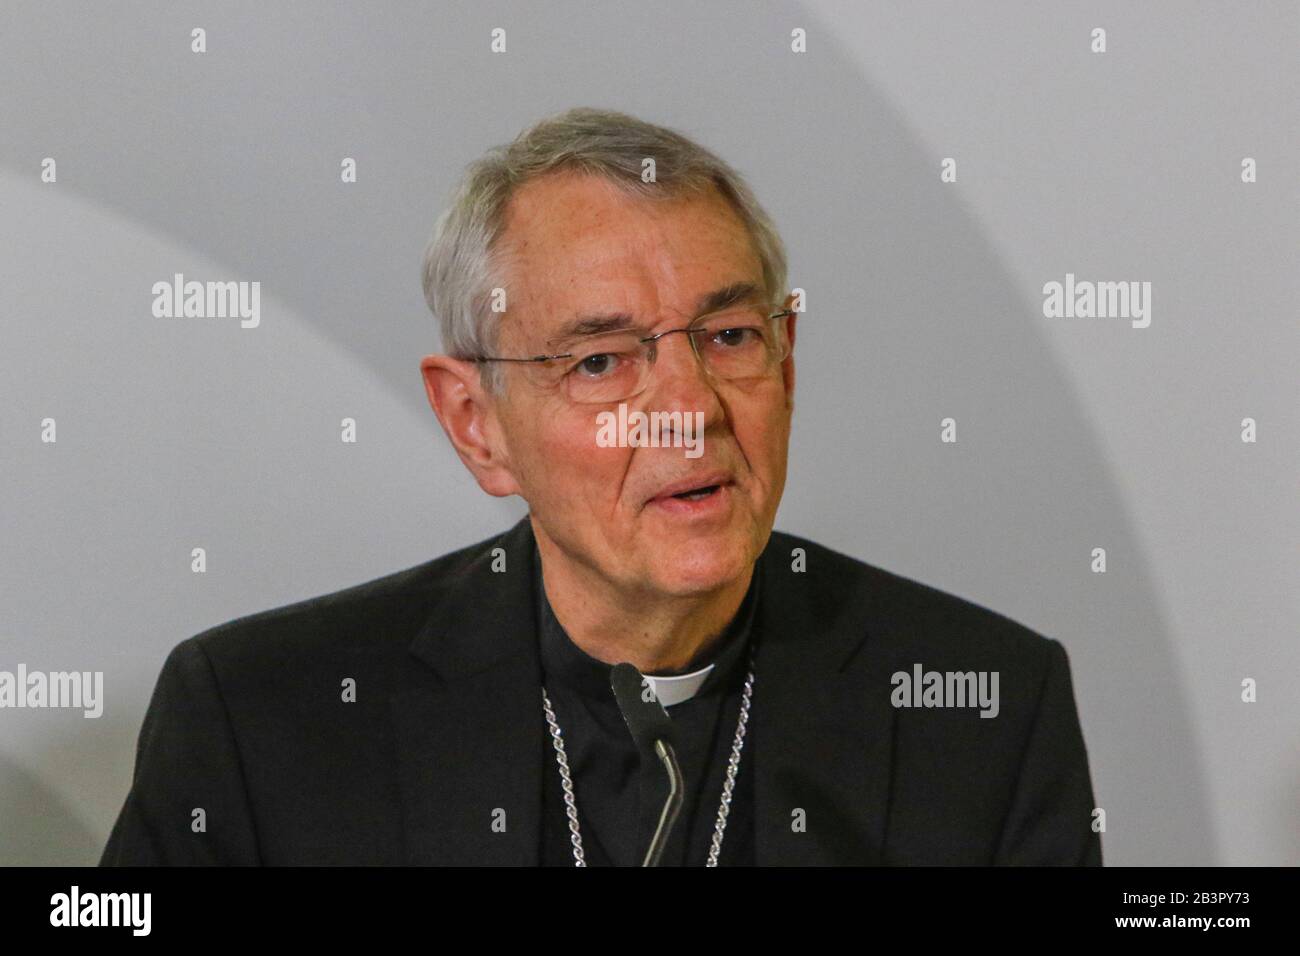 Ludwig Schick, the Roman Catholic Archbishop of Bamberg and chairman of the Committee for International Church Affairs of the German Bishops' Conference, speaks at a press conference. The results of the Amazon synod were discussed at a press conference during the Spring Plenary Session of the German Bishops’ Conference in Mainz, Germany on March 4, 2020. (Photo by Michael Debets/Pacific Press/Sipa USA) Stock Photo